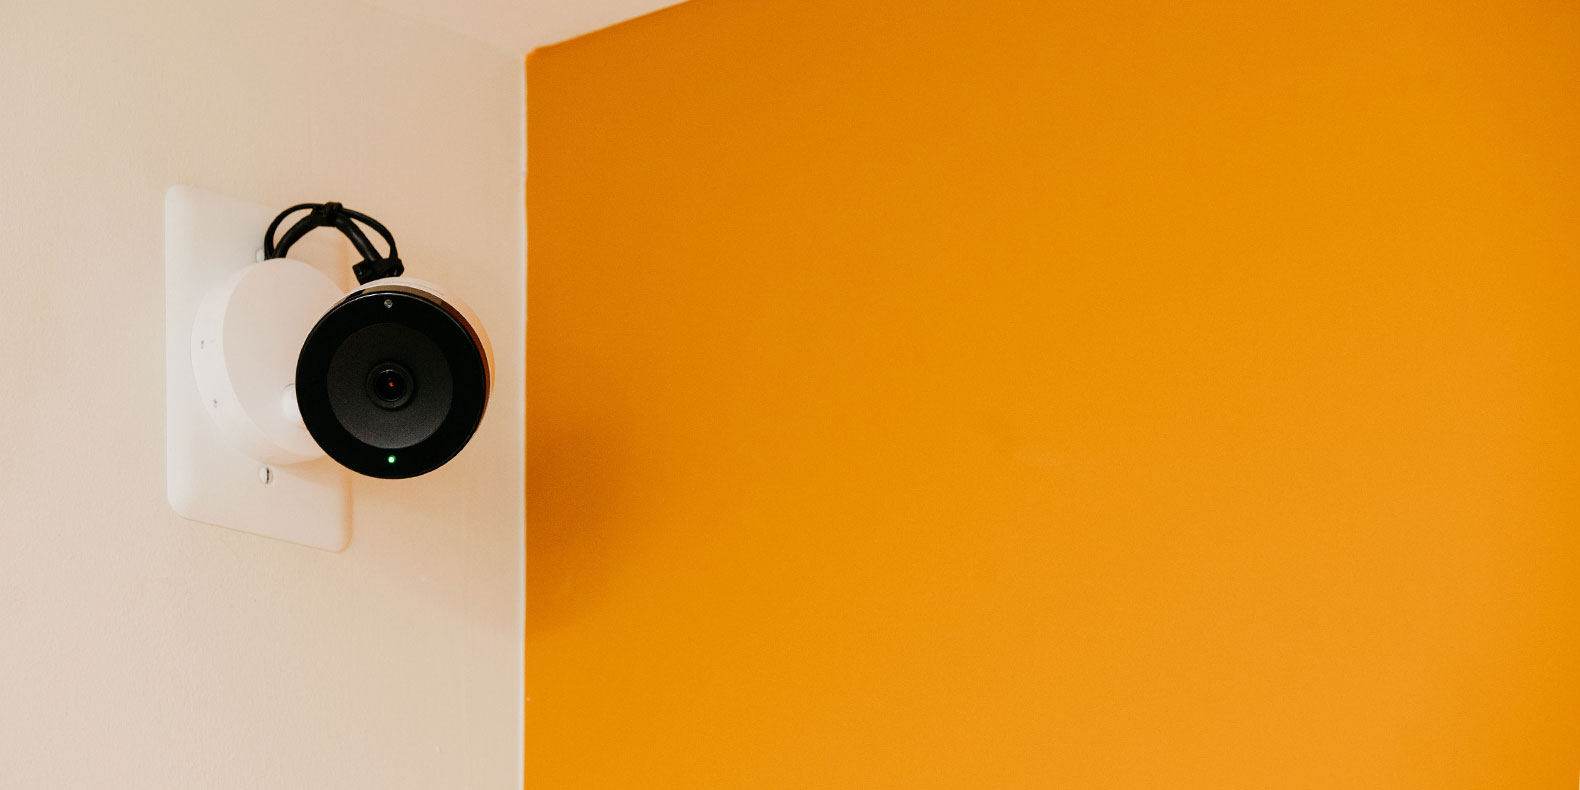 Everything You Need to Know About Cellular Security Cameras